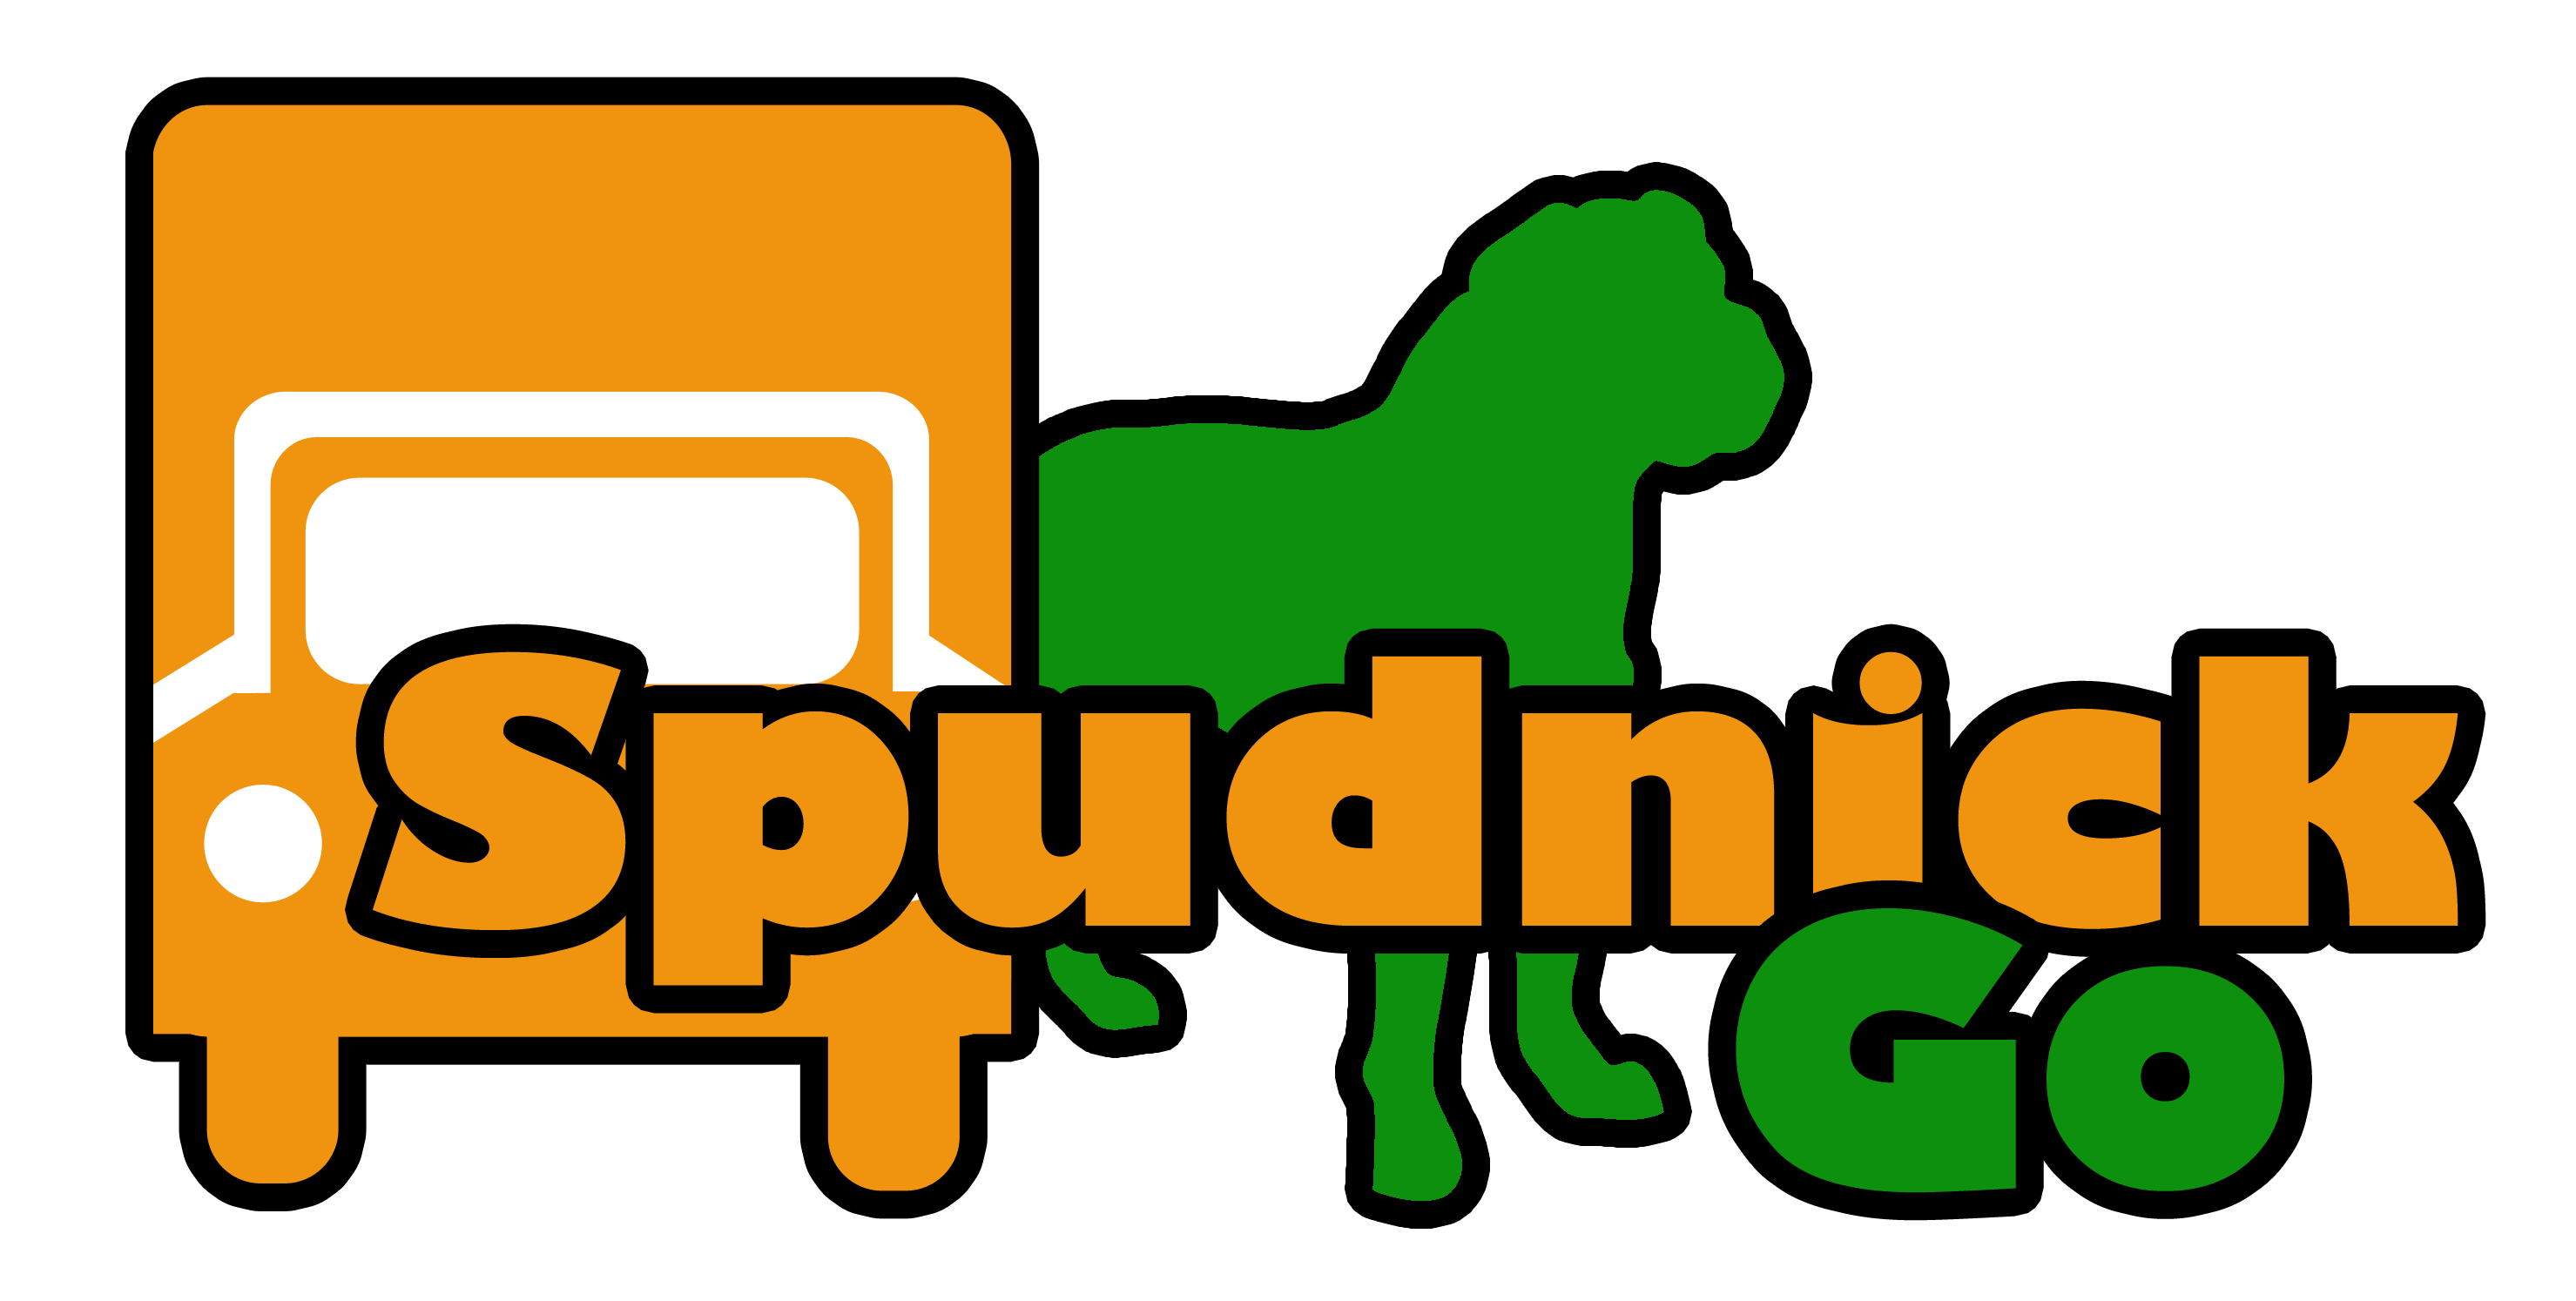 Spudnick Go allows people to get whatever they may need for their pets on the go.